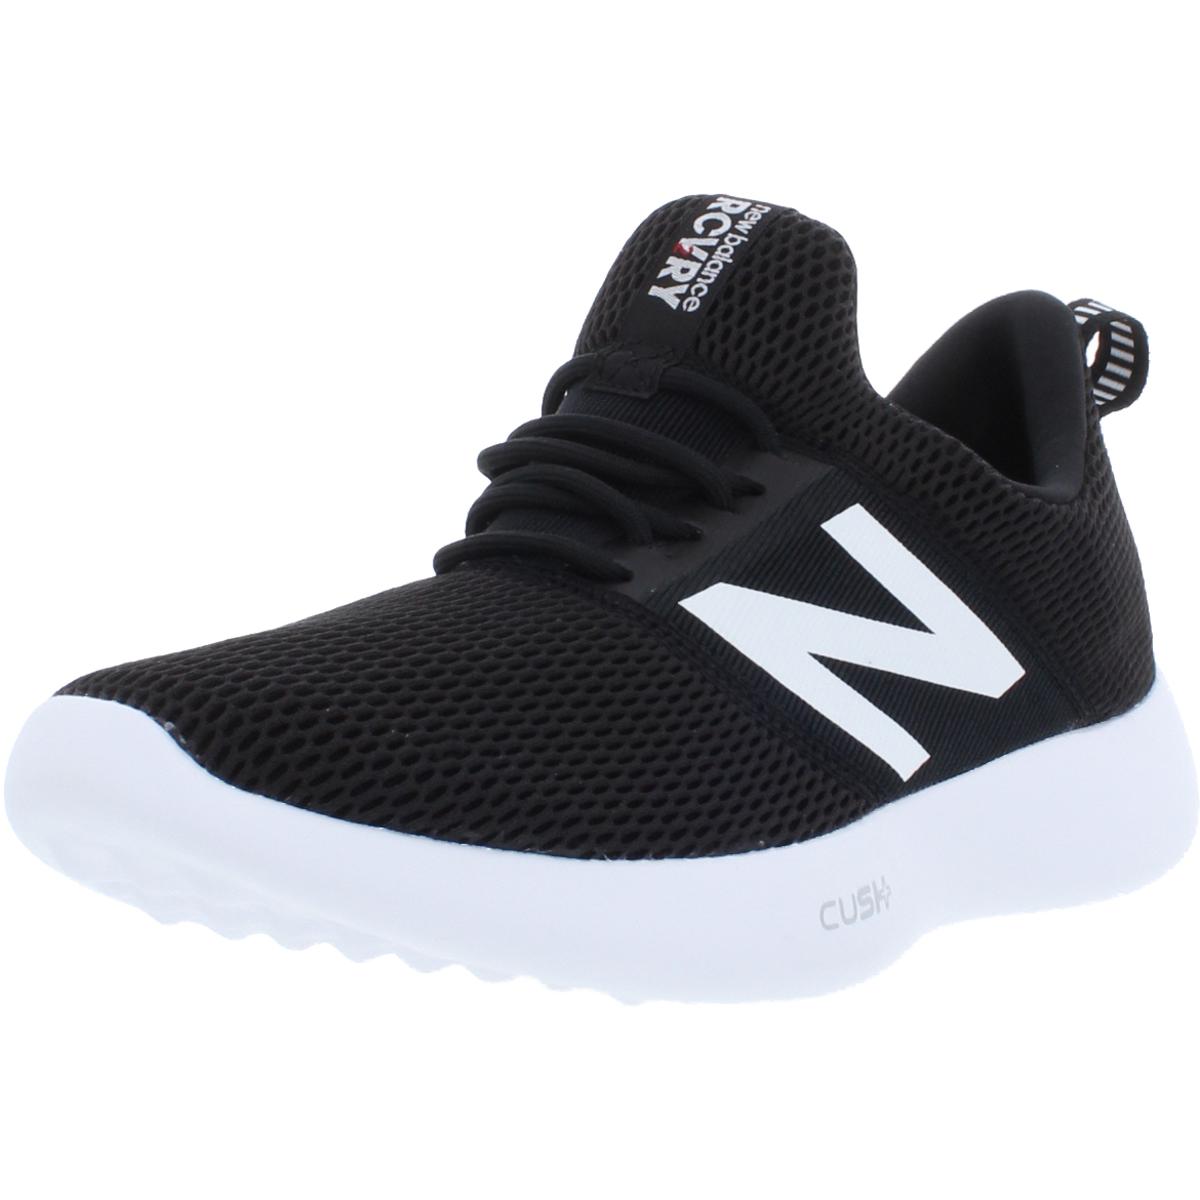 nb recovery shoes